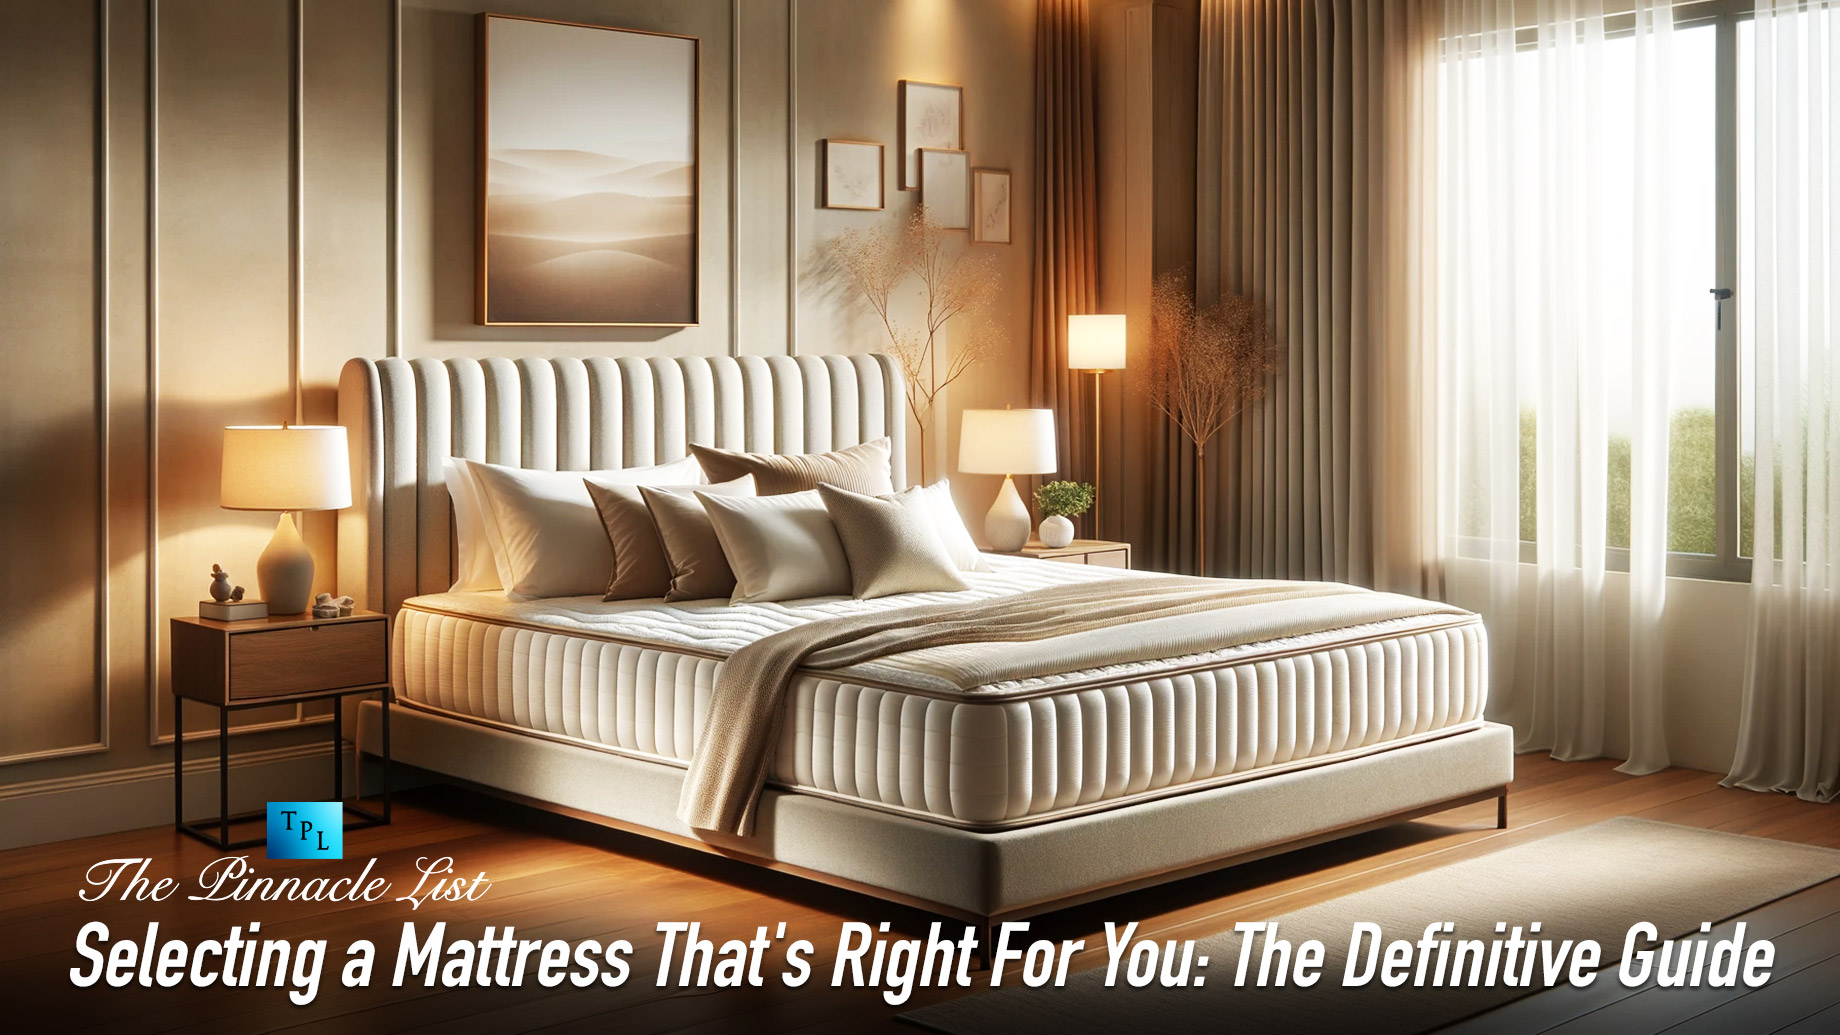 Selecting a Mattress That’s Right For You: The Definitive Guide